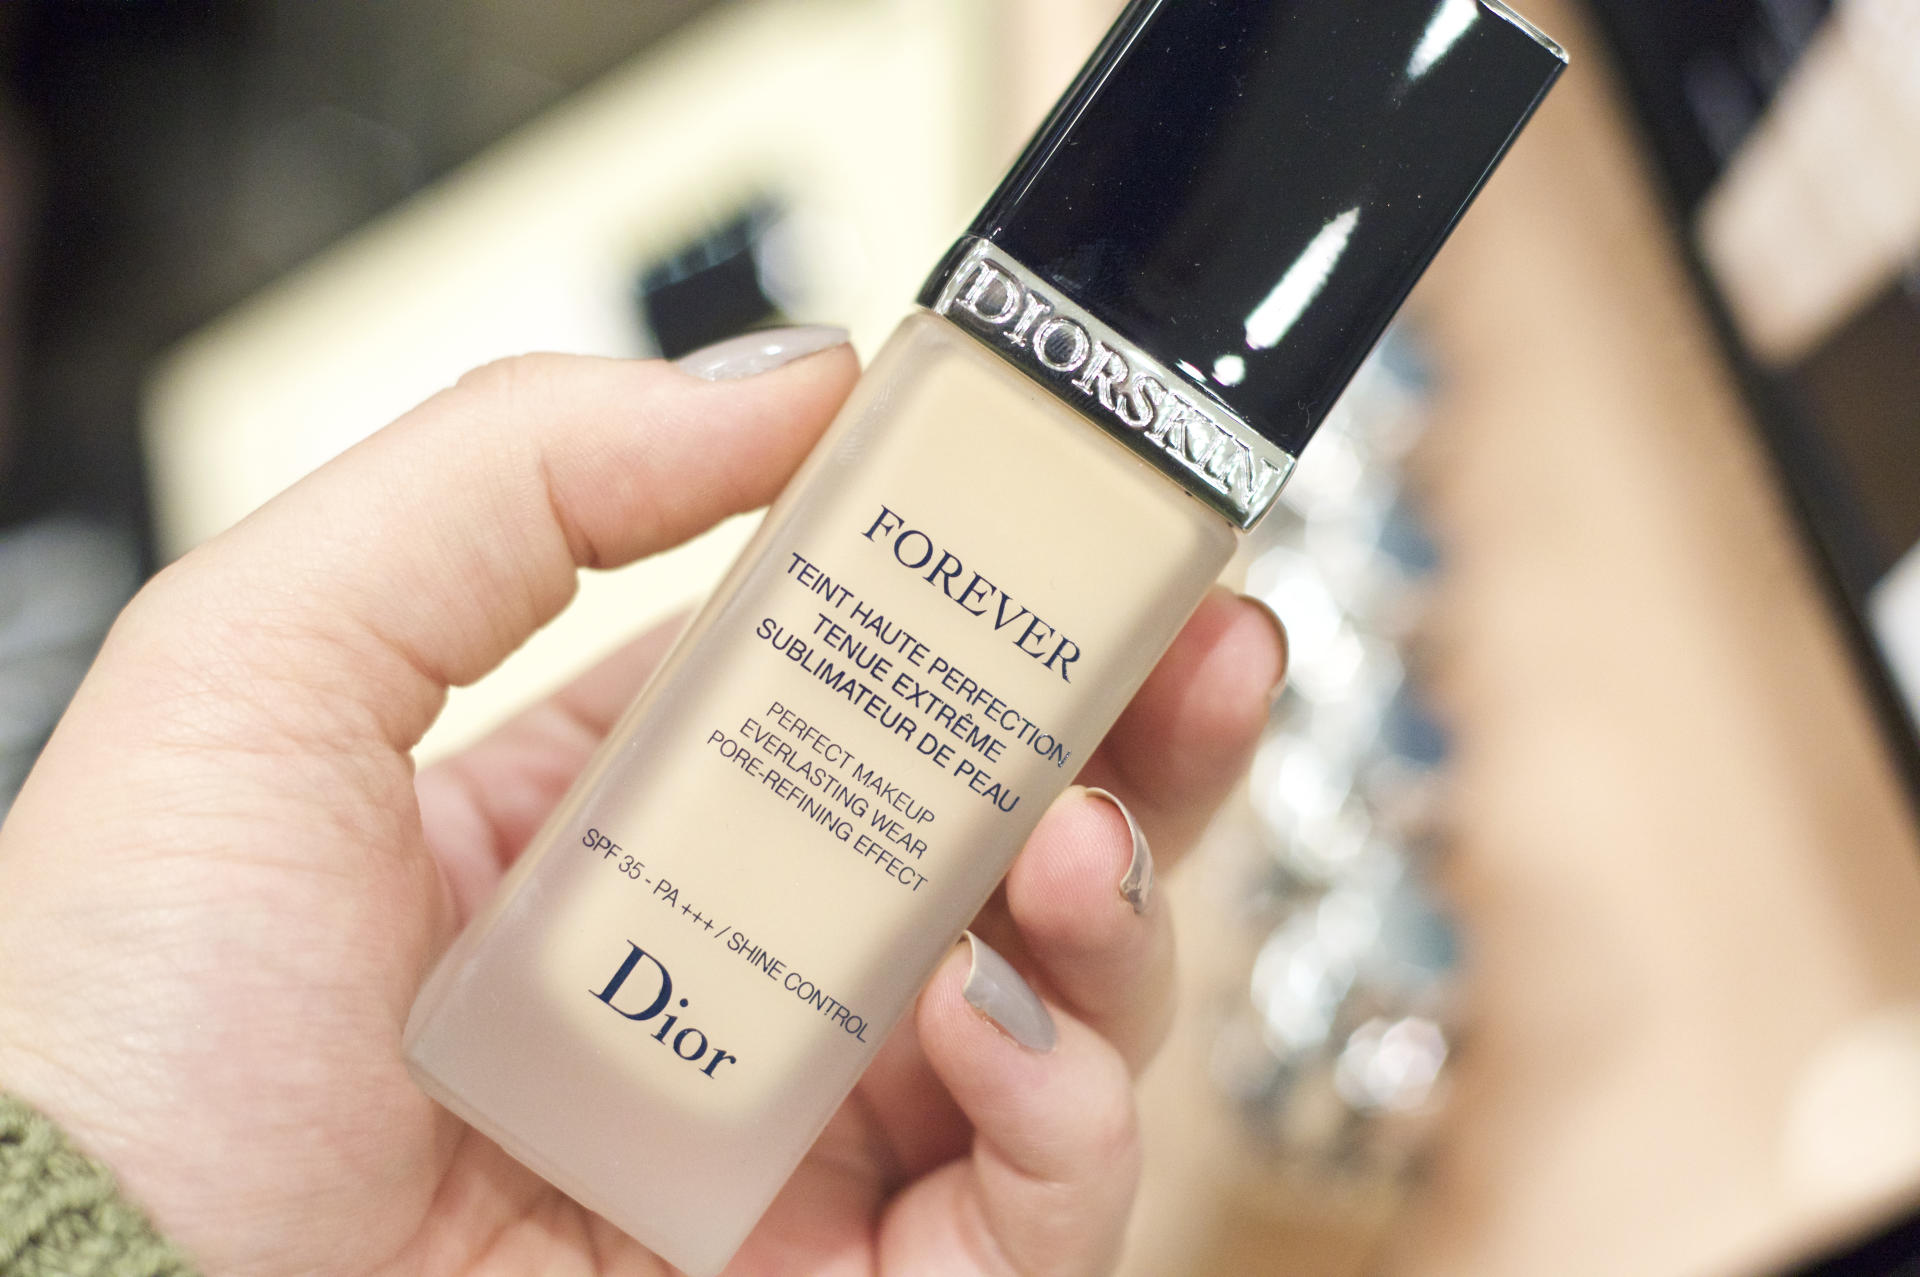 Made From Beauty Dior Forever Foundation